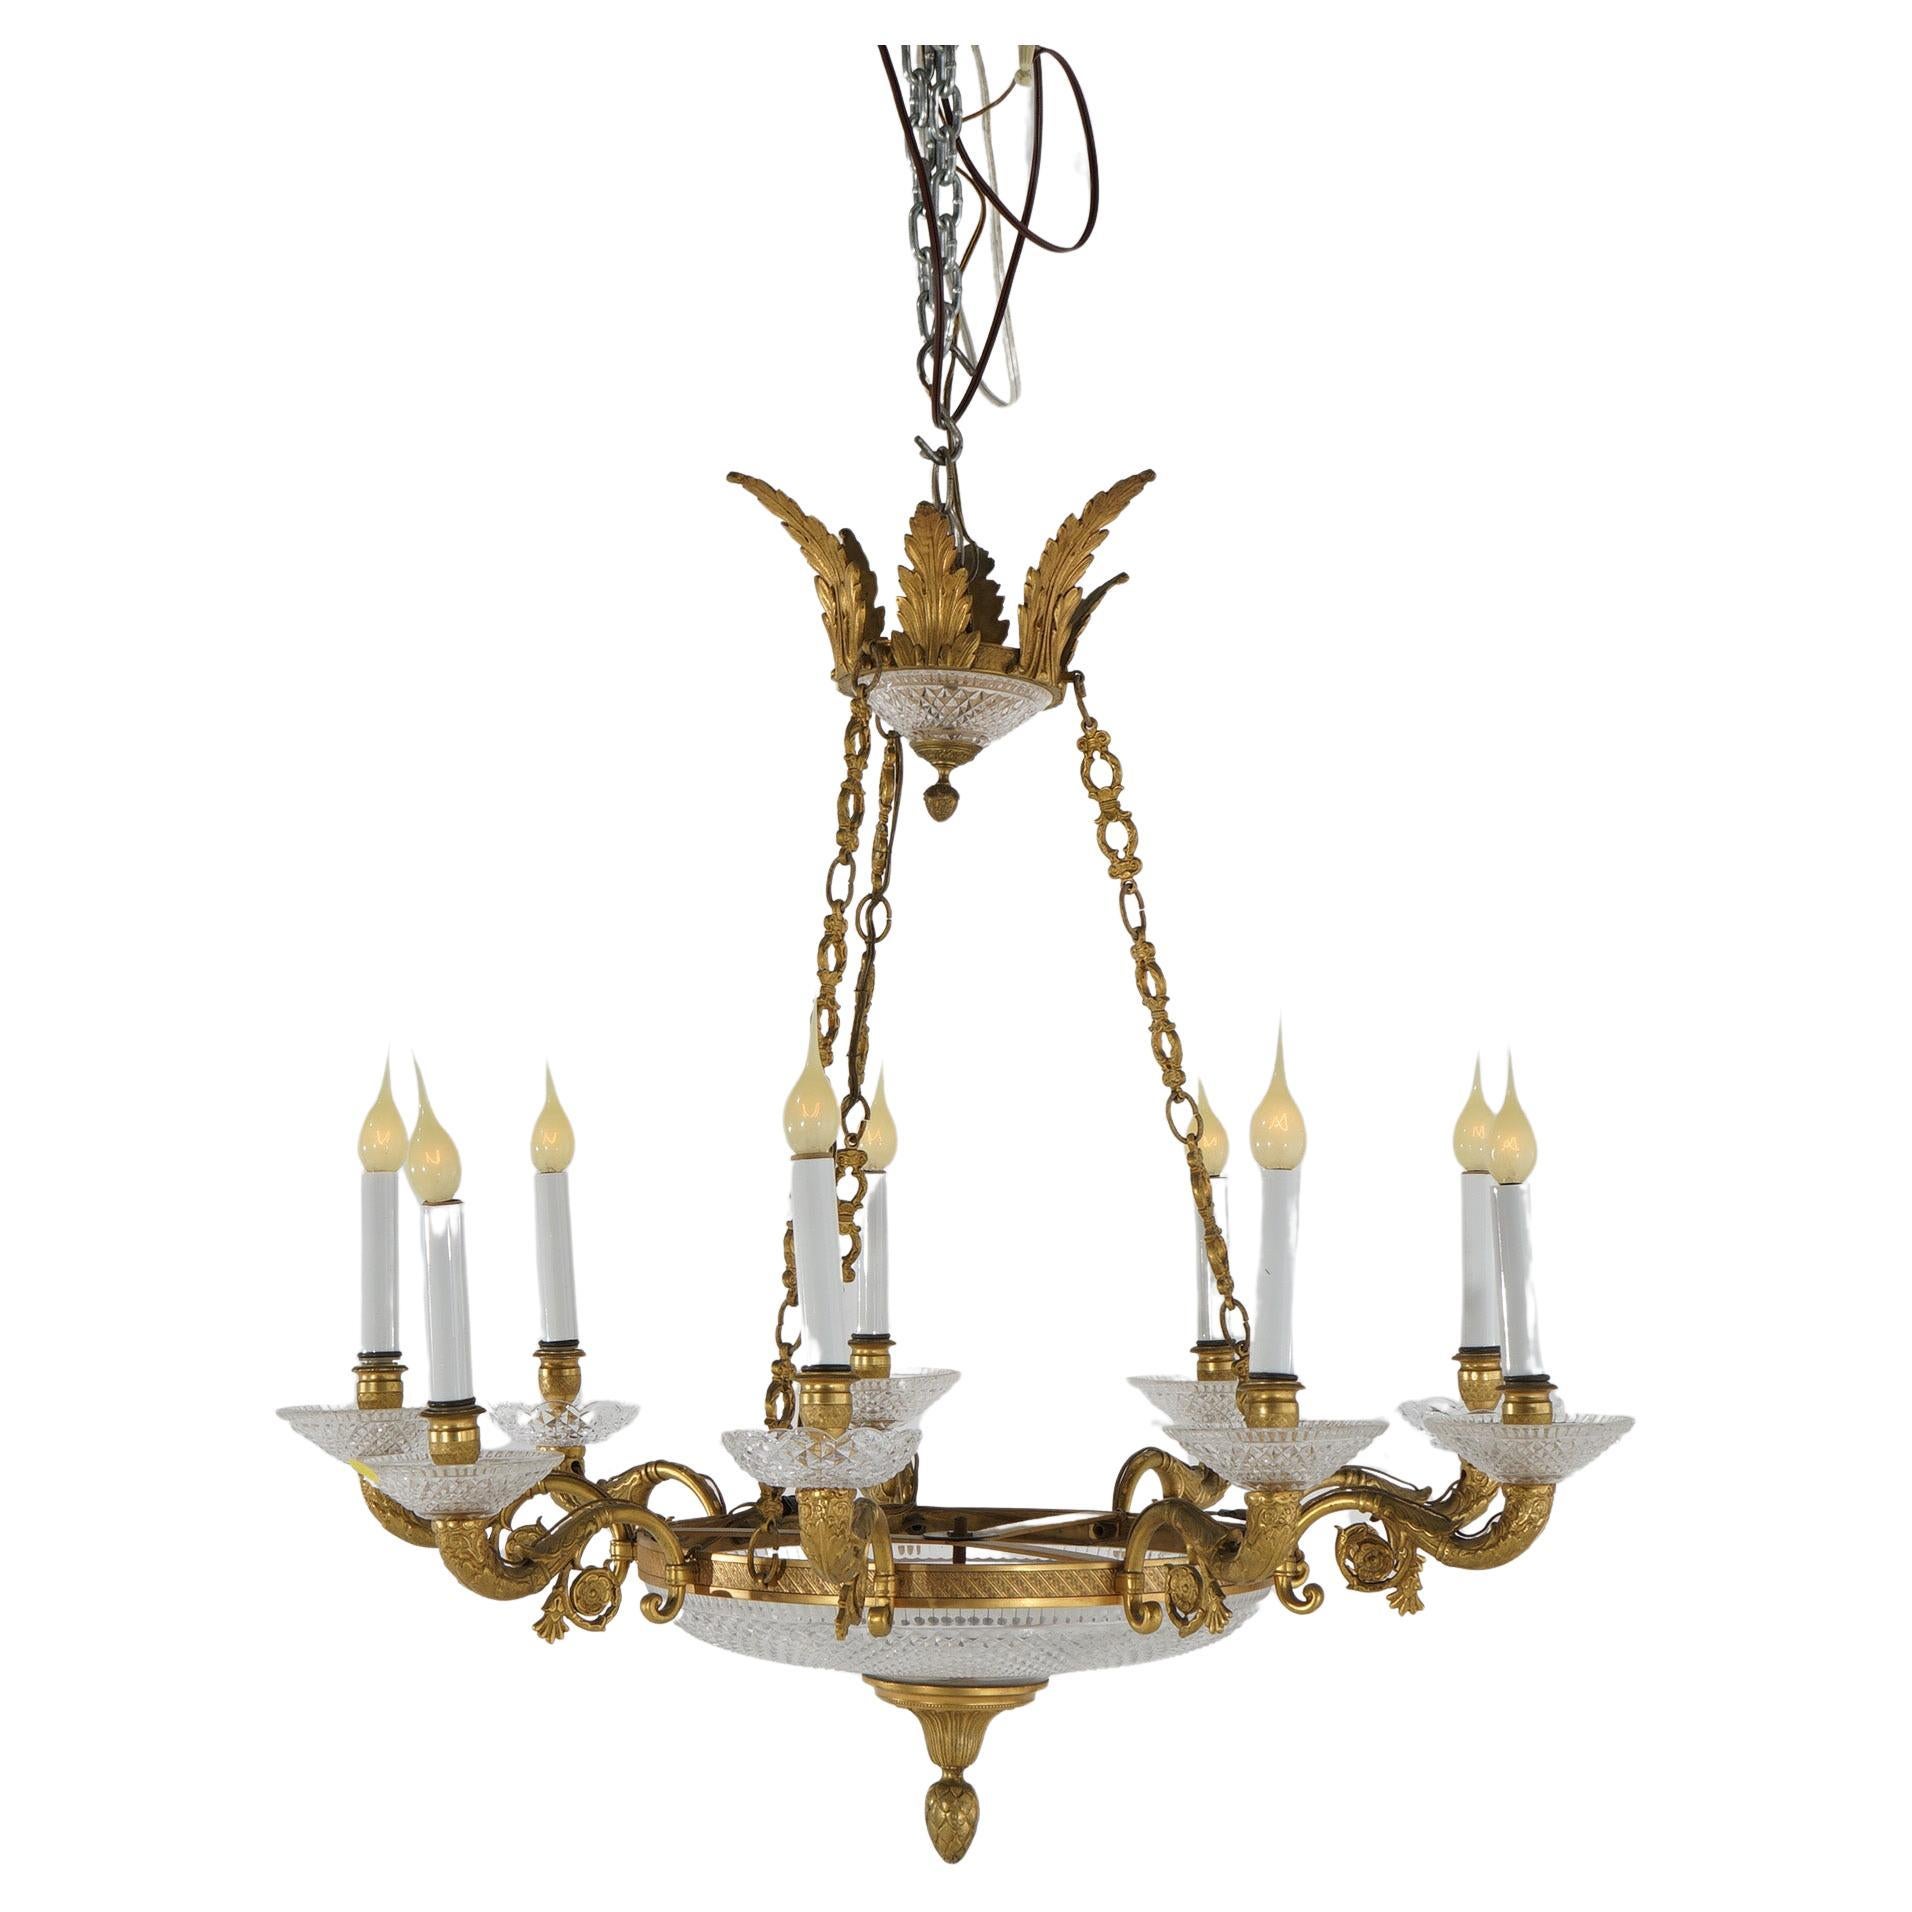 Antique French Louis XIV Style Gilt Bronze & Crystal Nine-Light Chandelier